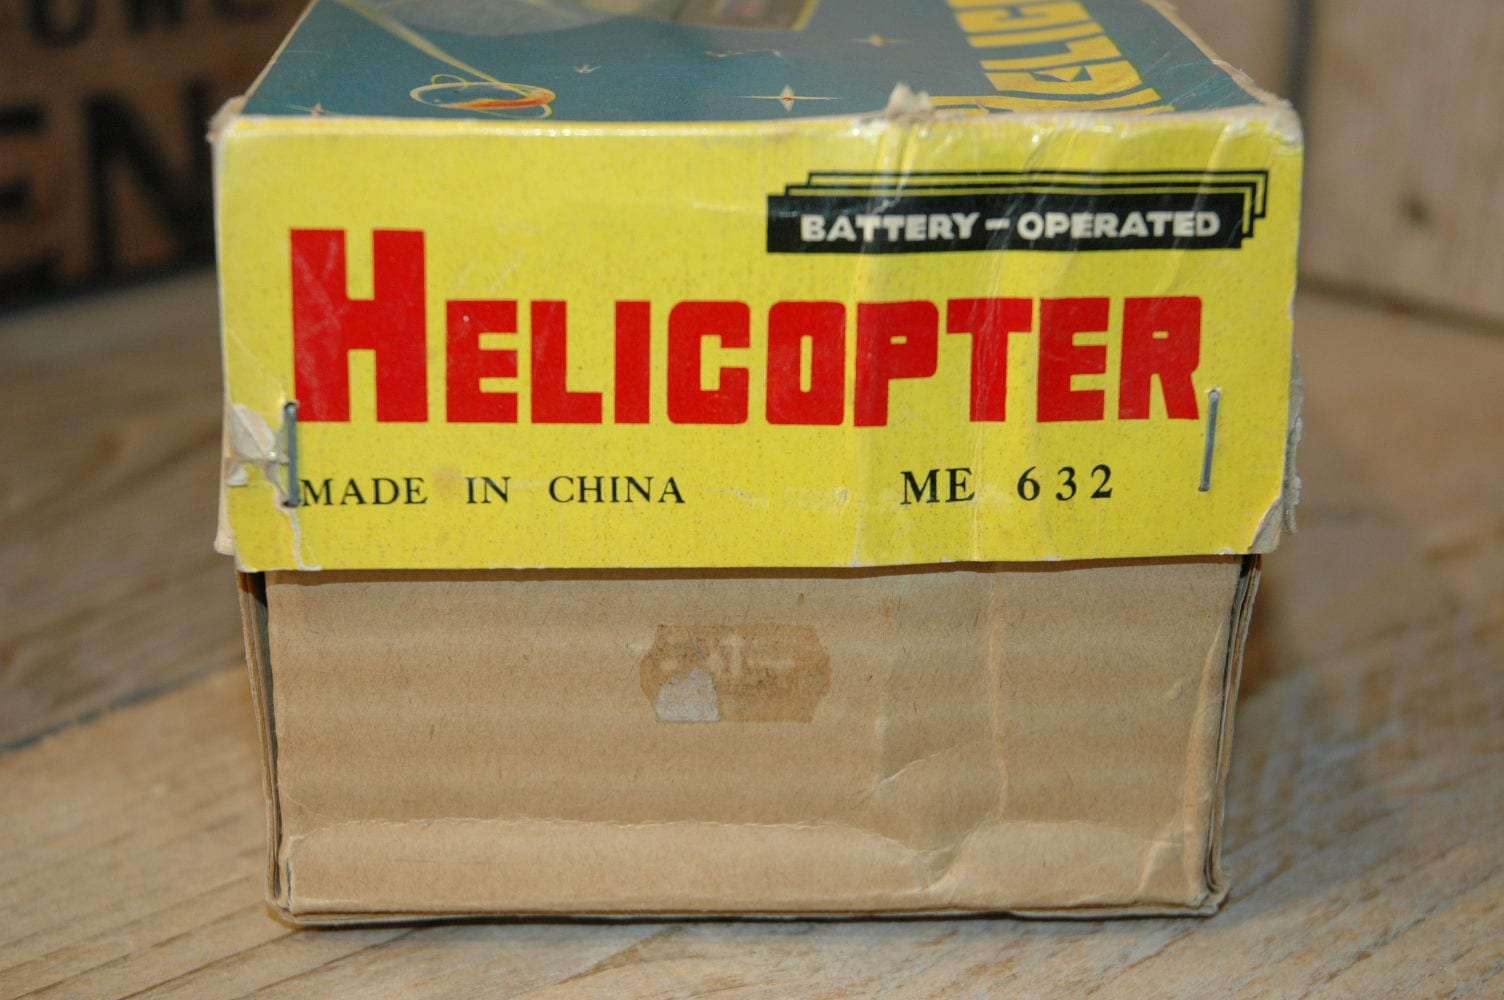 China - Helicopter ME-632